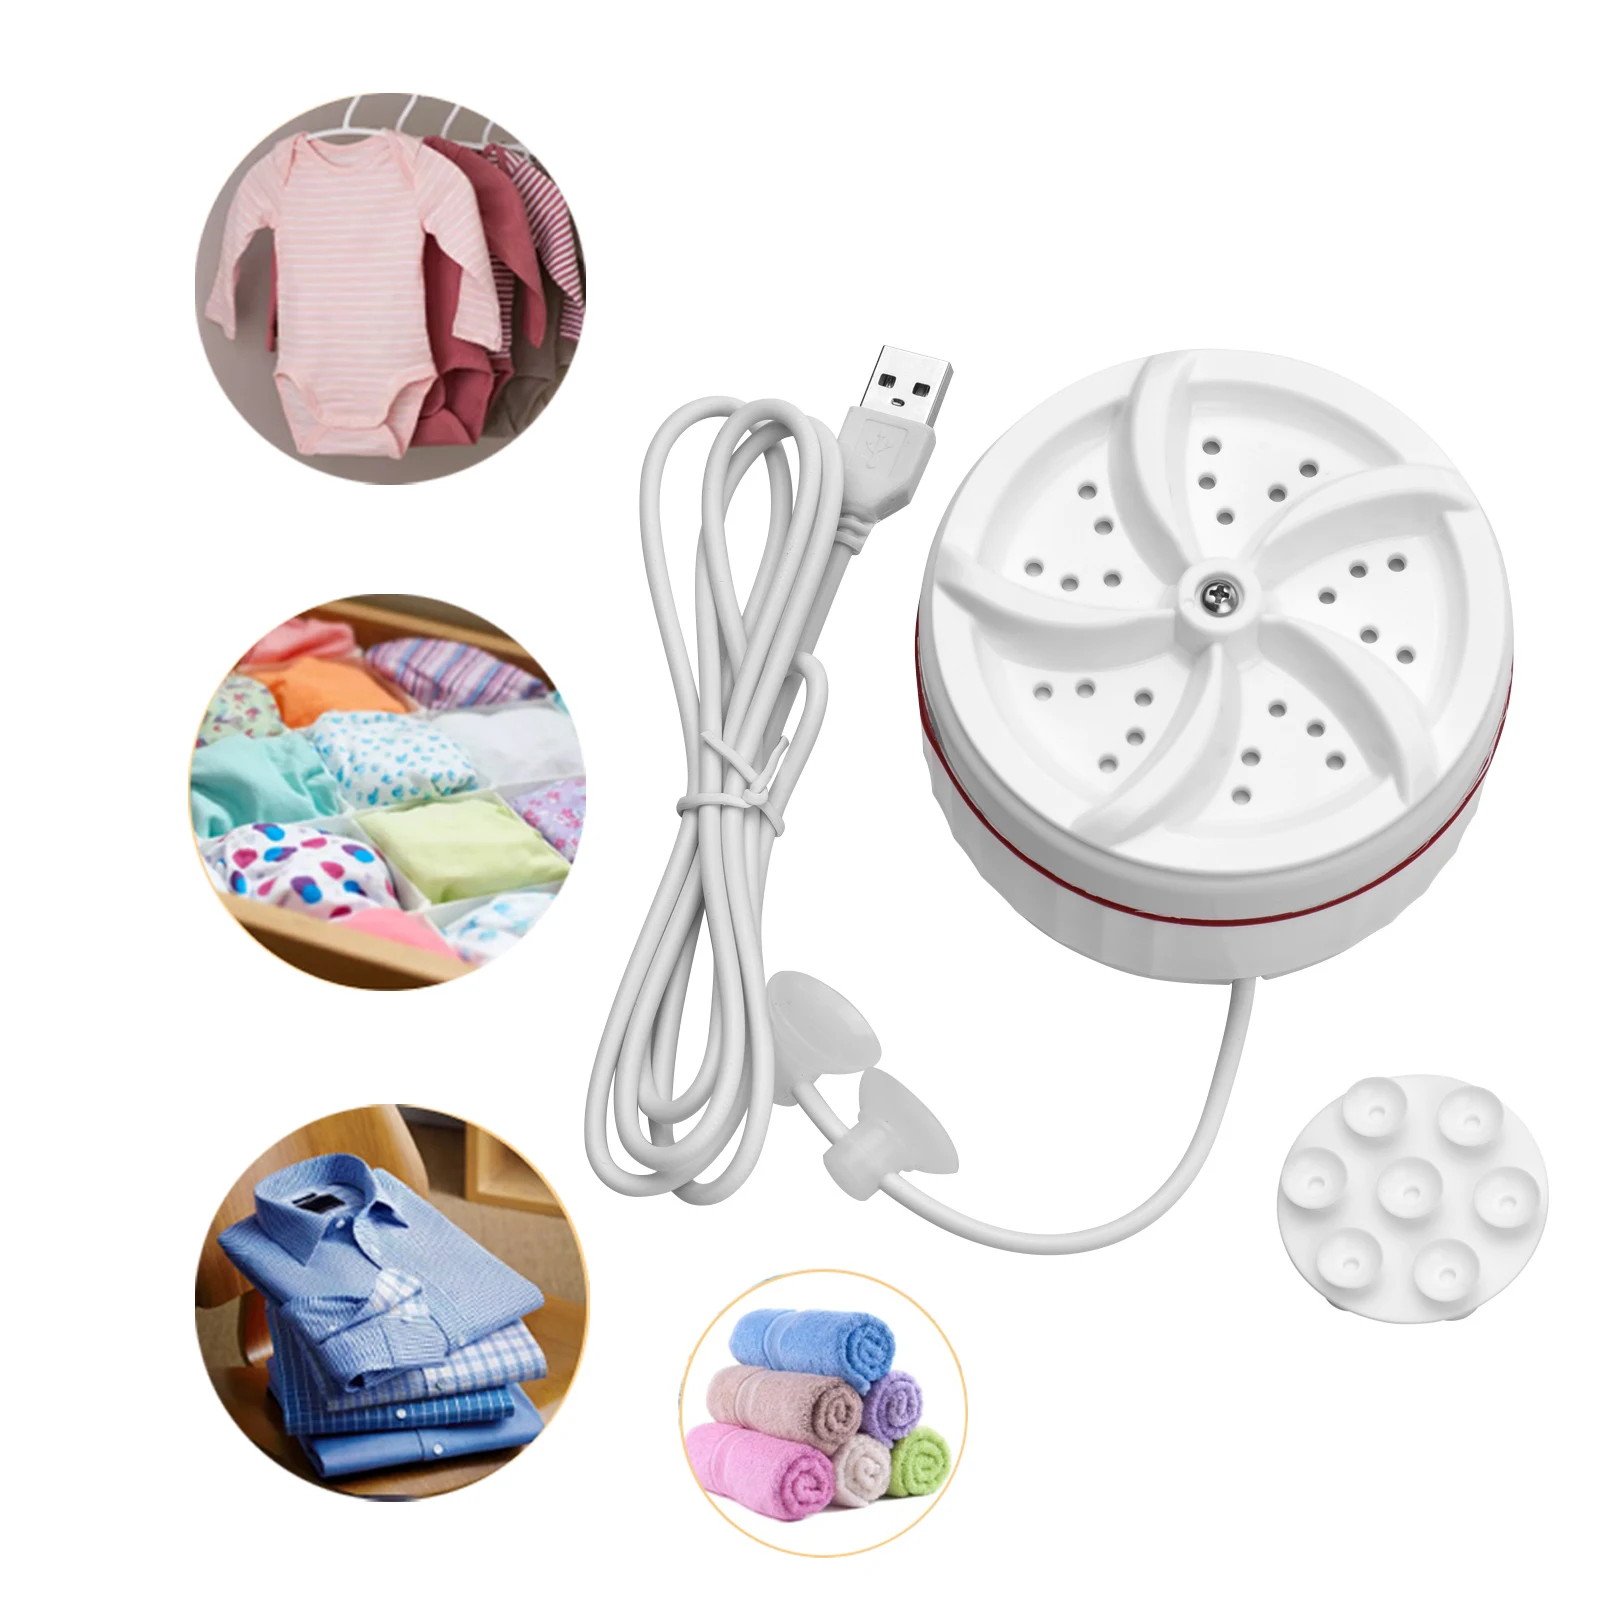 Ine portable 3in1 turbo usb powered washer clothing cleaning washing machine for travel thumb200